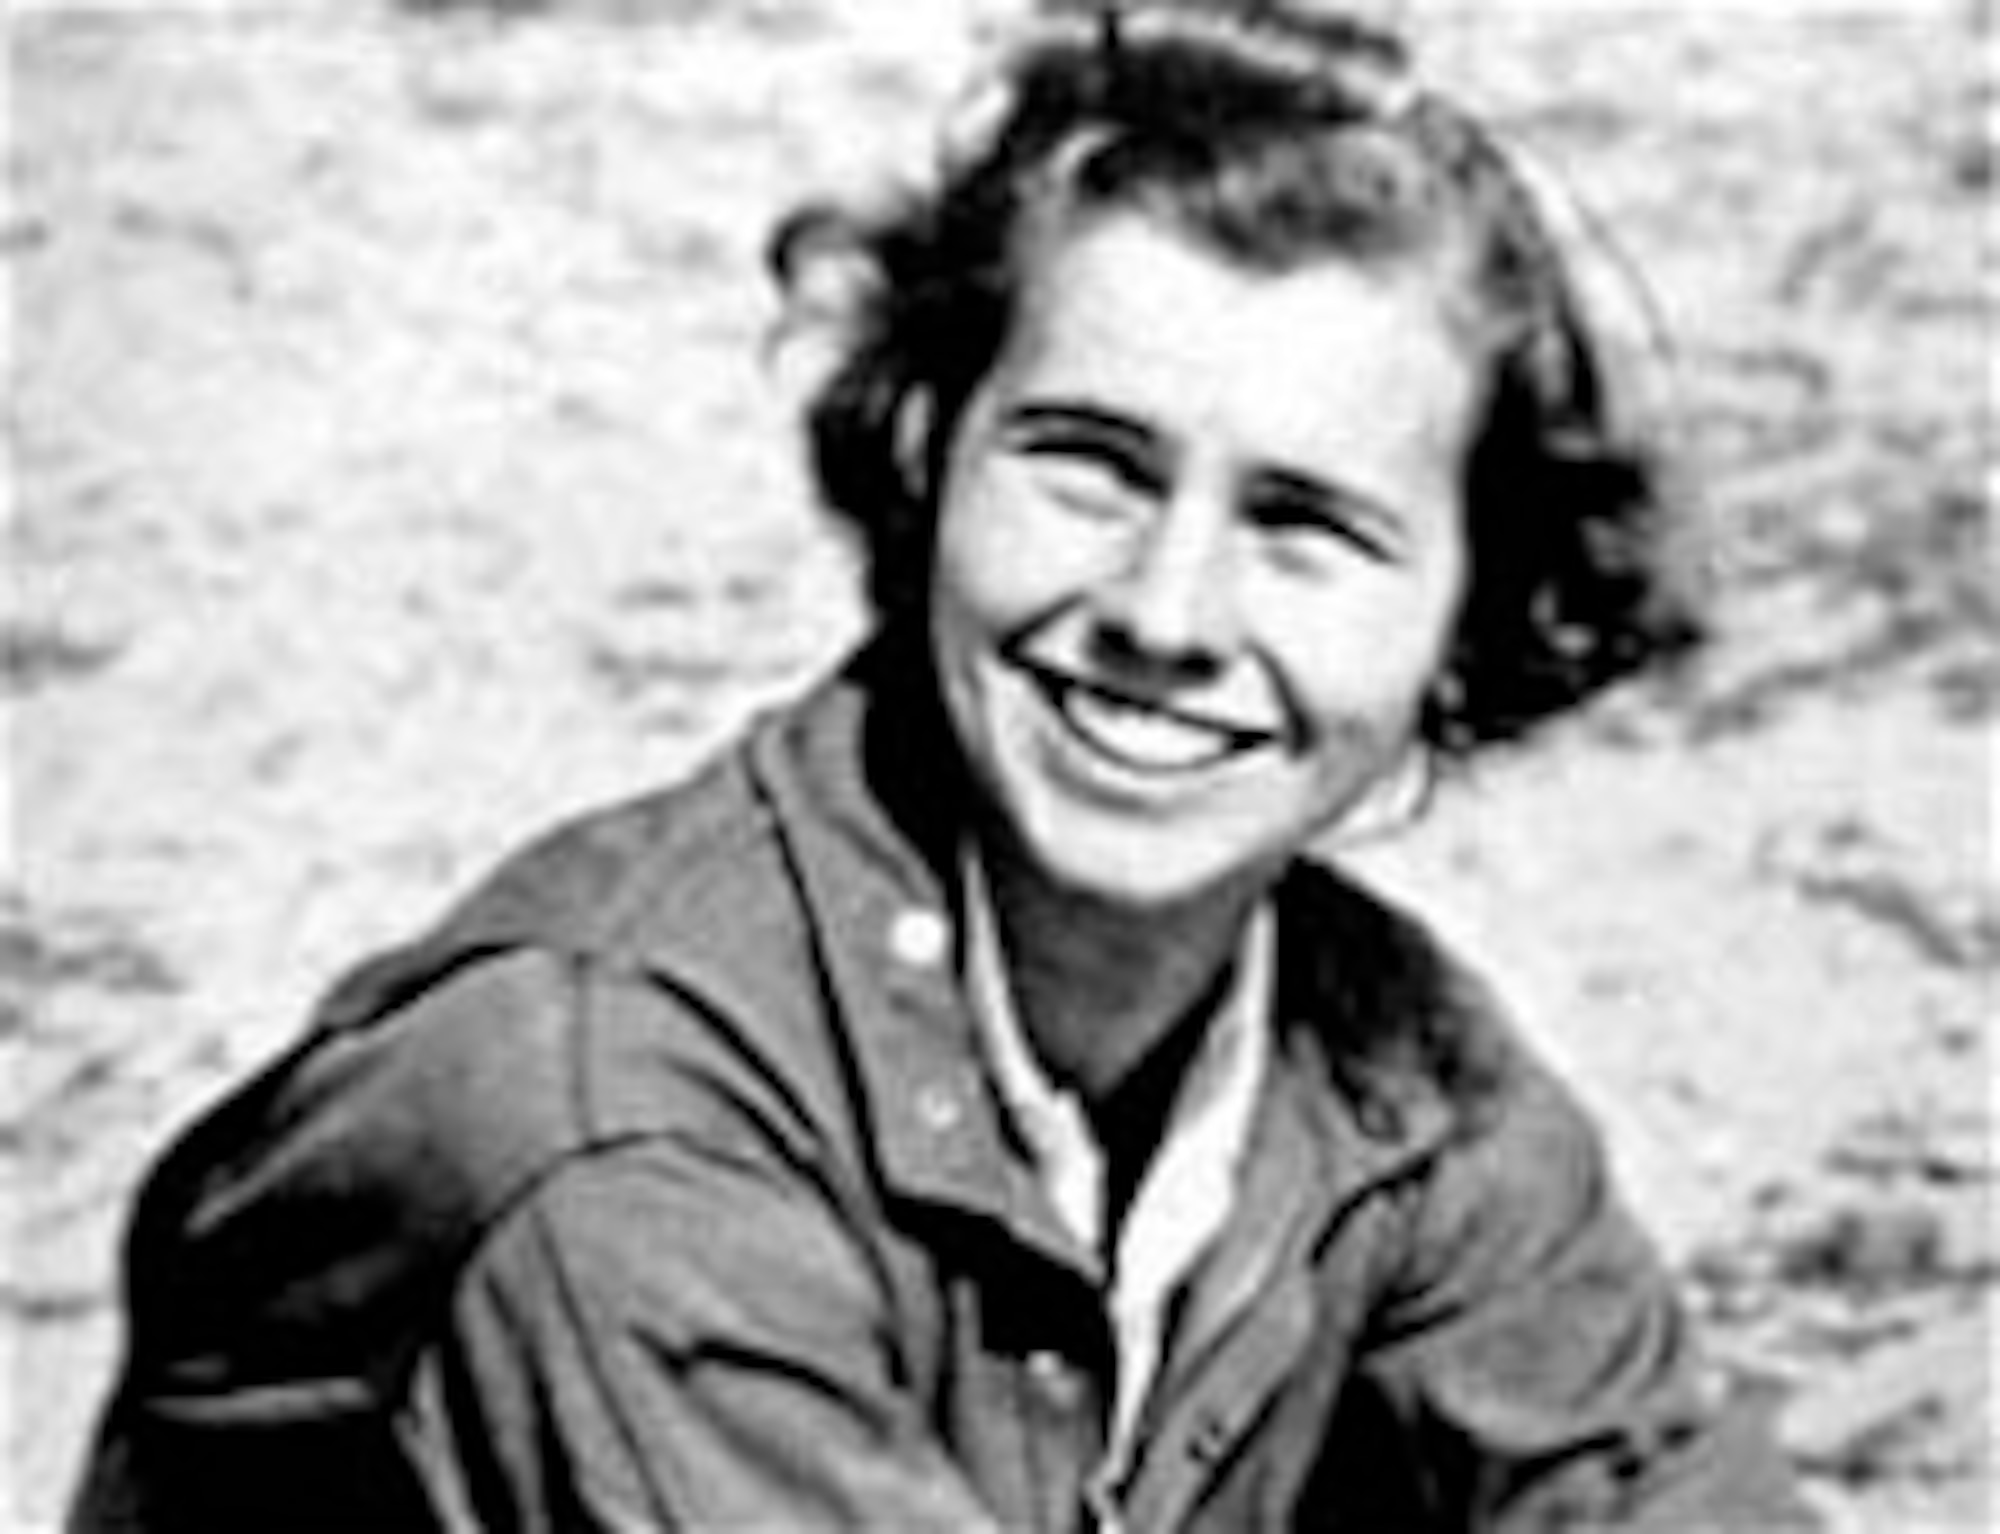 Gertrude Meserve was an instructor pilot who taught hundreds of students at Harvard and MIT. (U.S. Air Force photo)